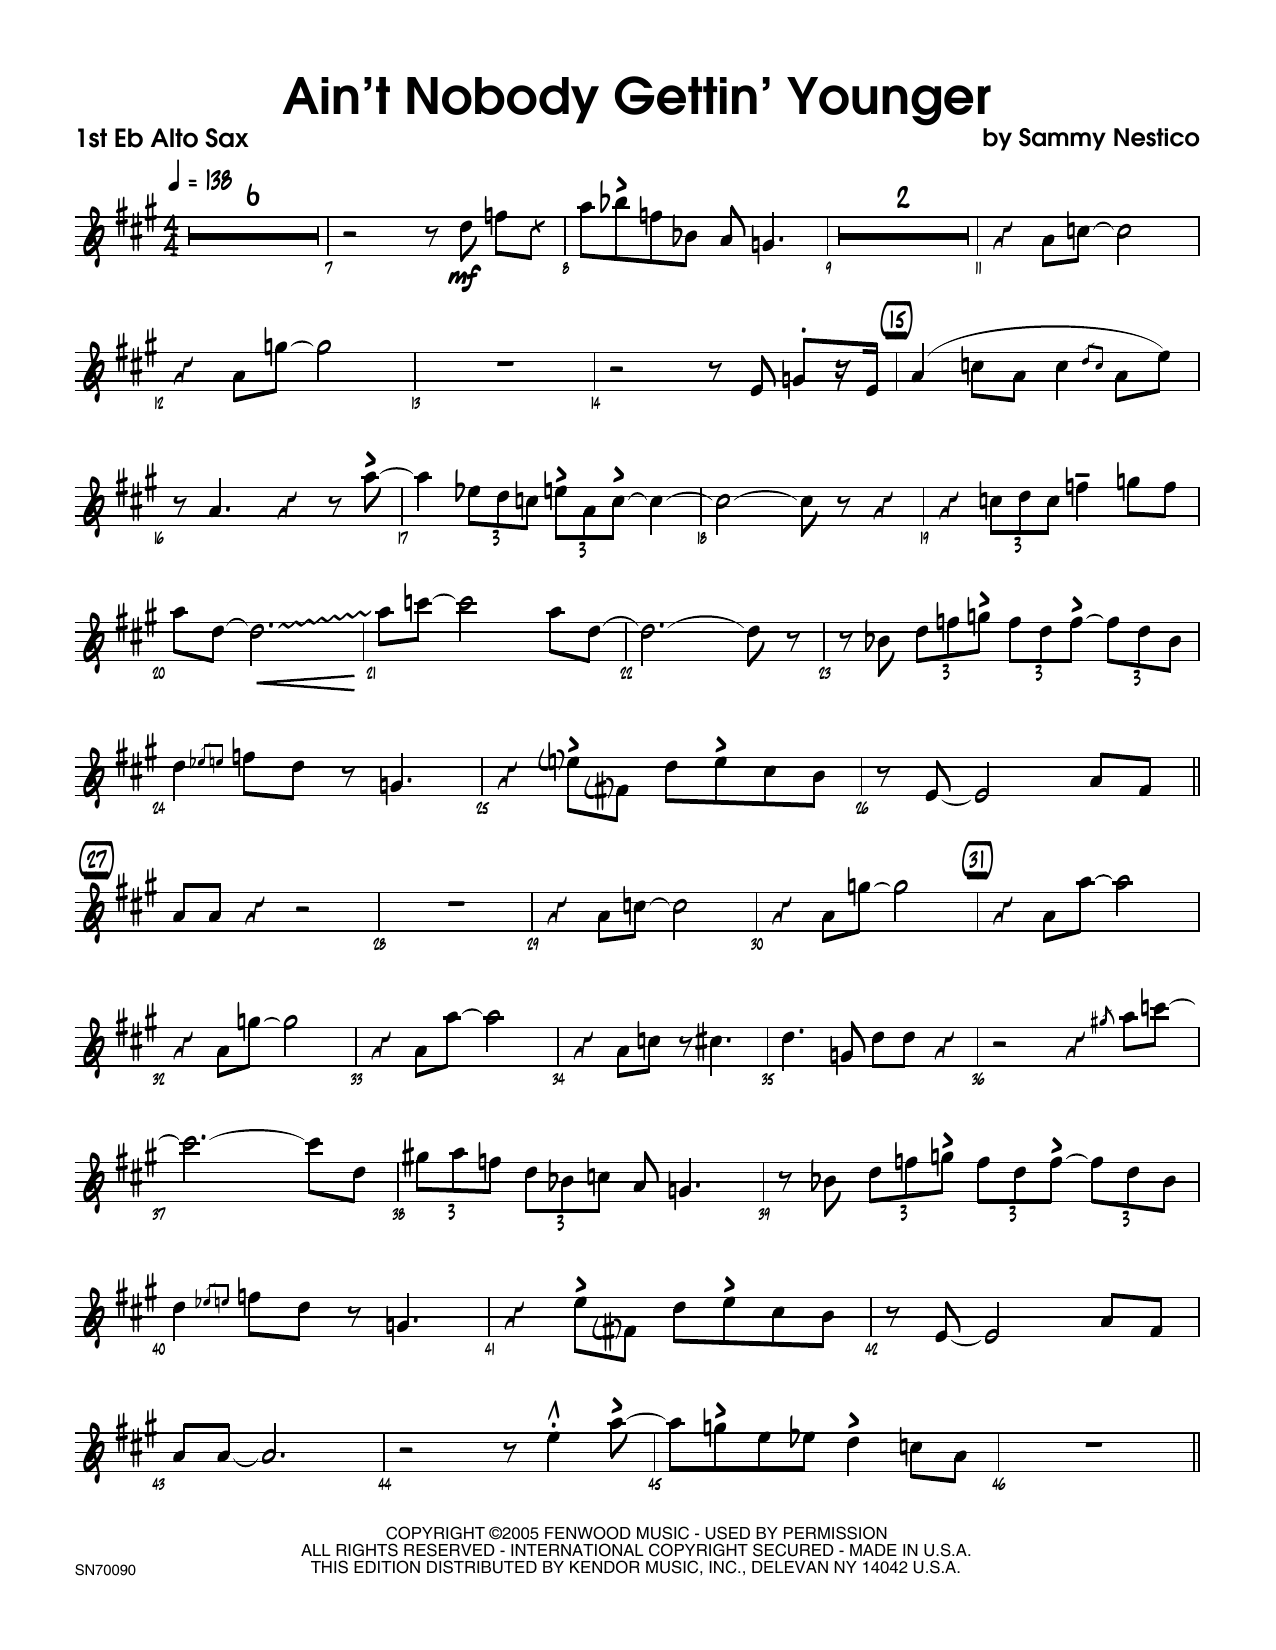 Download Sammy Nestico Ain't Nobody Gettin' Younger - 1st Eb A Sheet Music